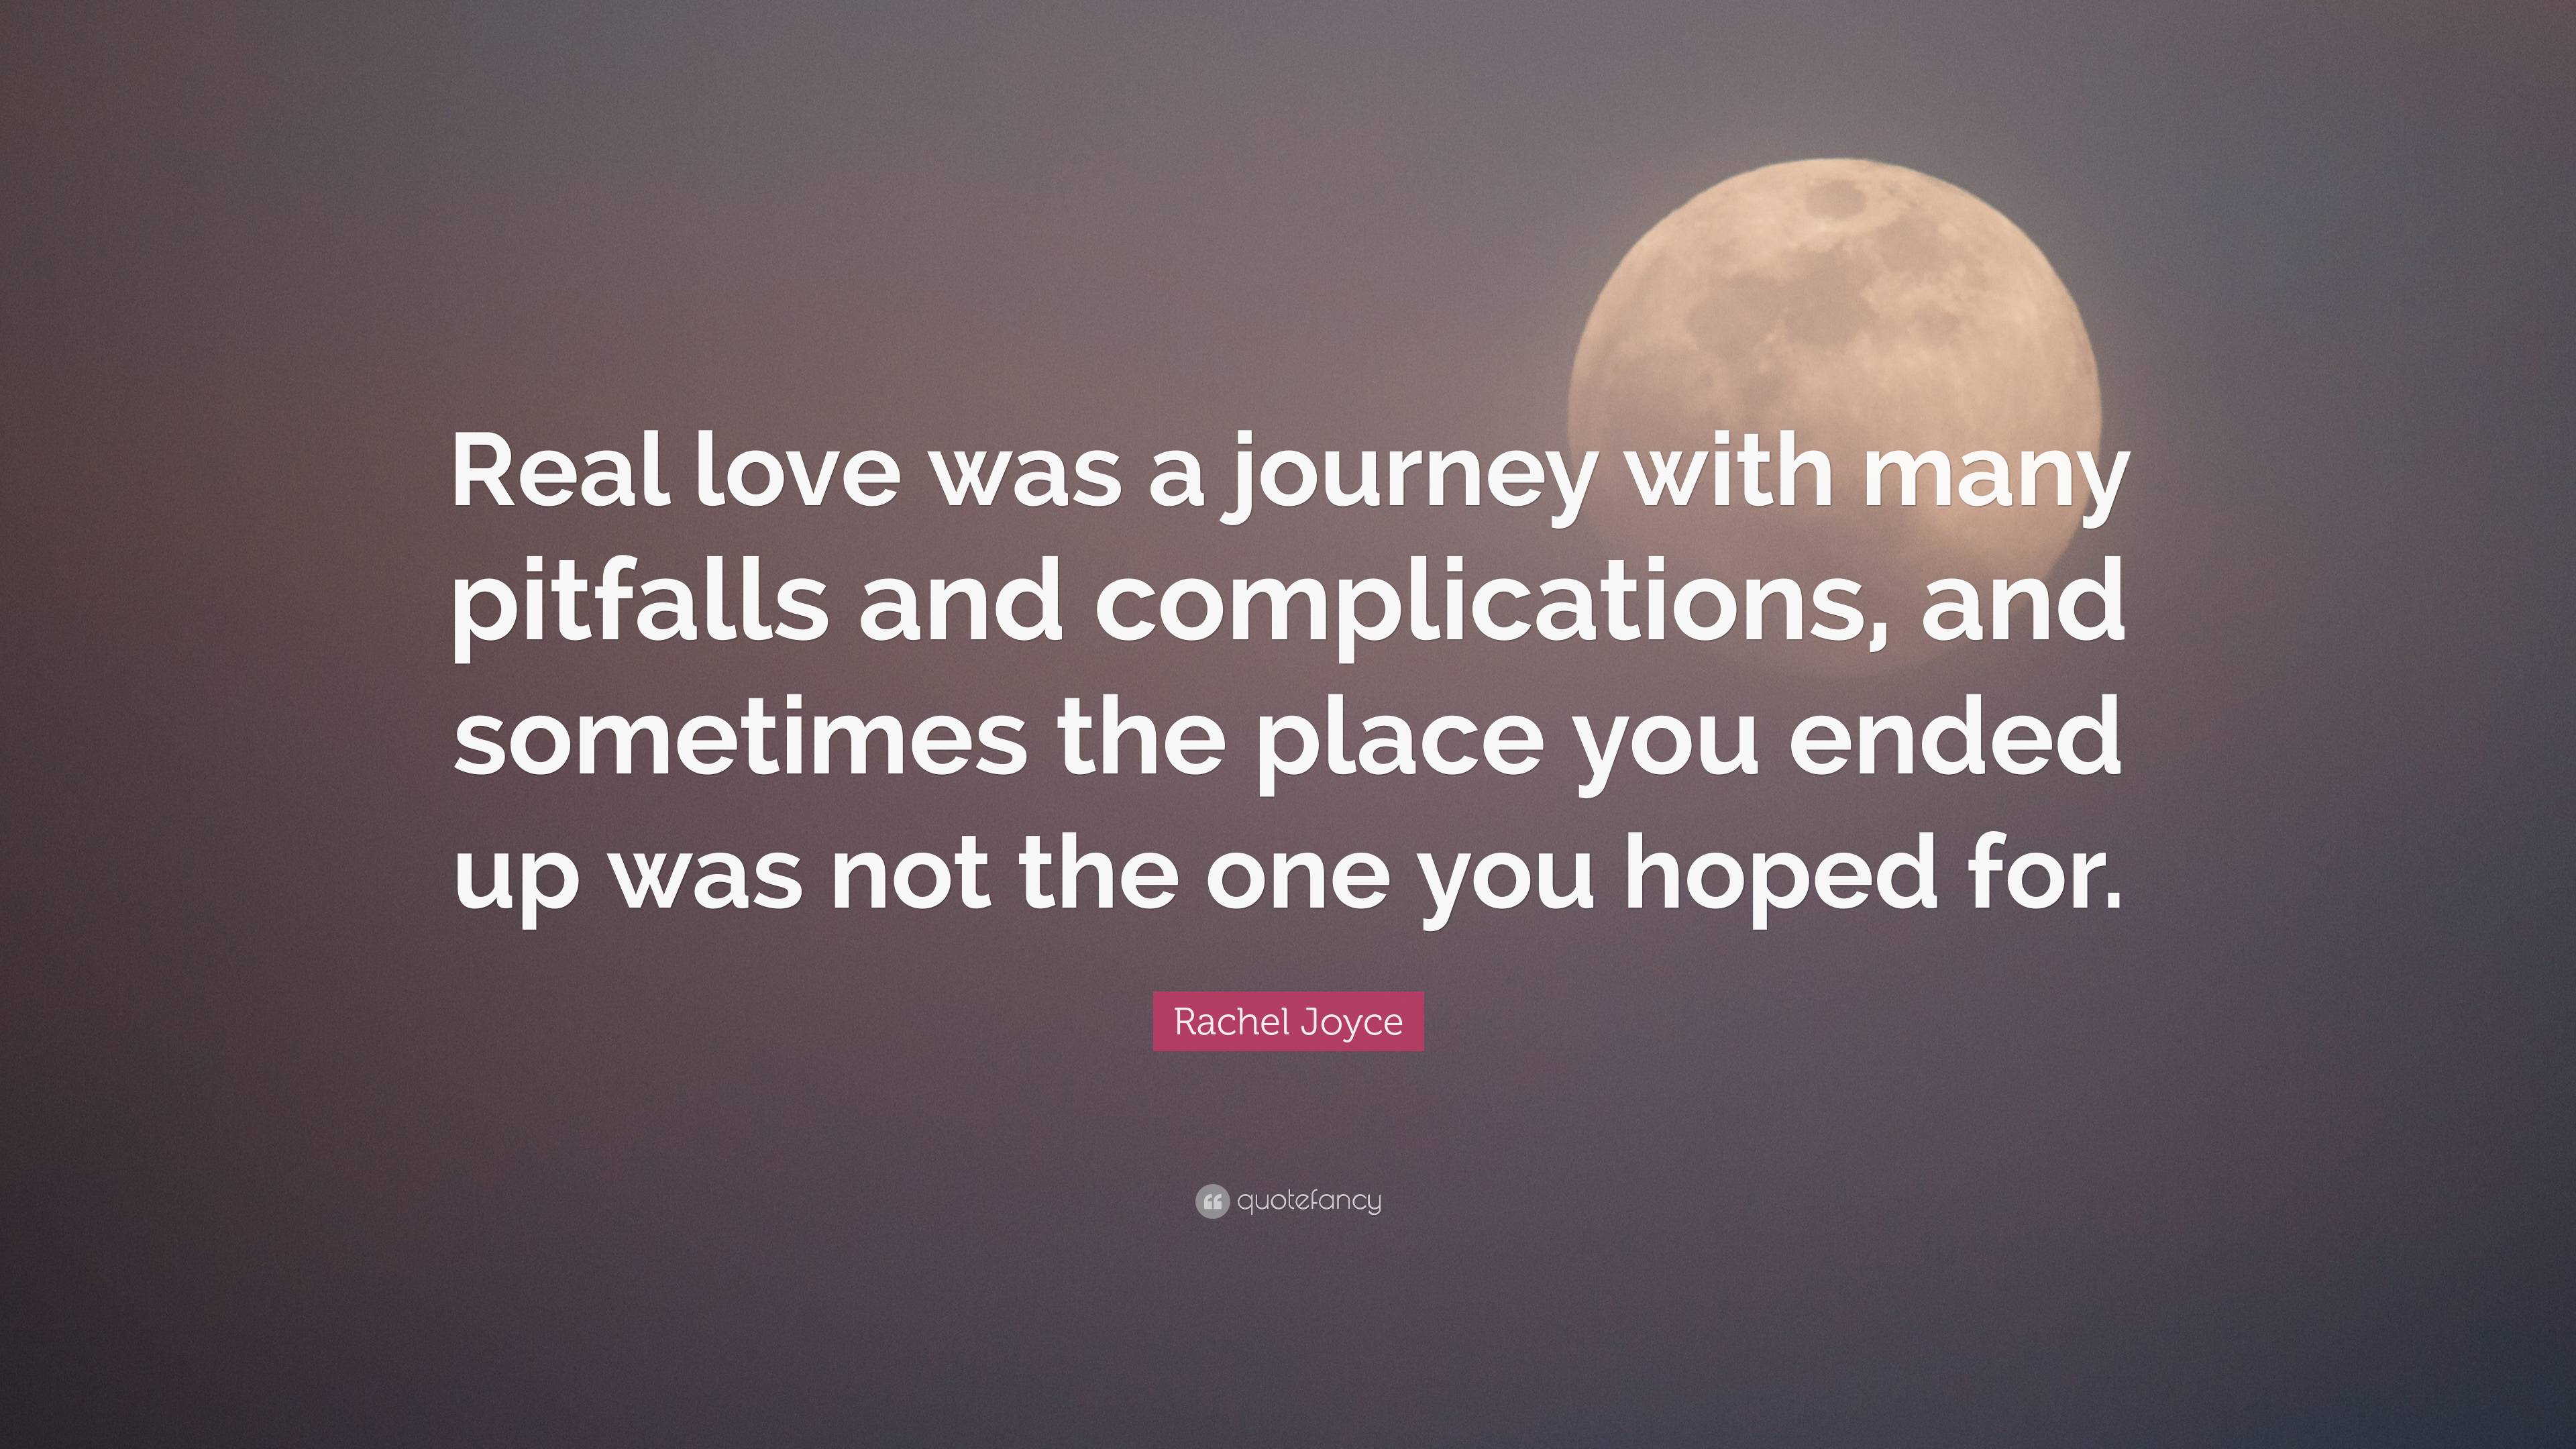 Rachel Joyce Quote: “Real love was a journey with many pitfalls and  complications, and sometimes the place you ended up was not the one you  h”